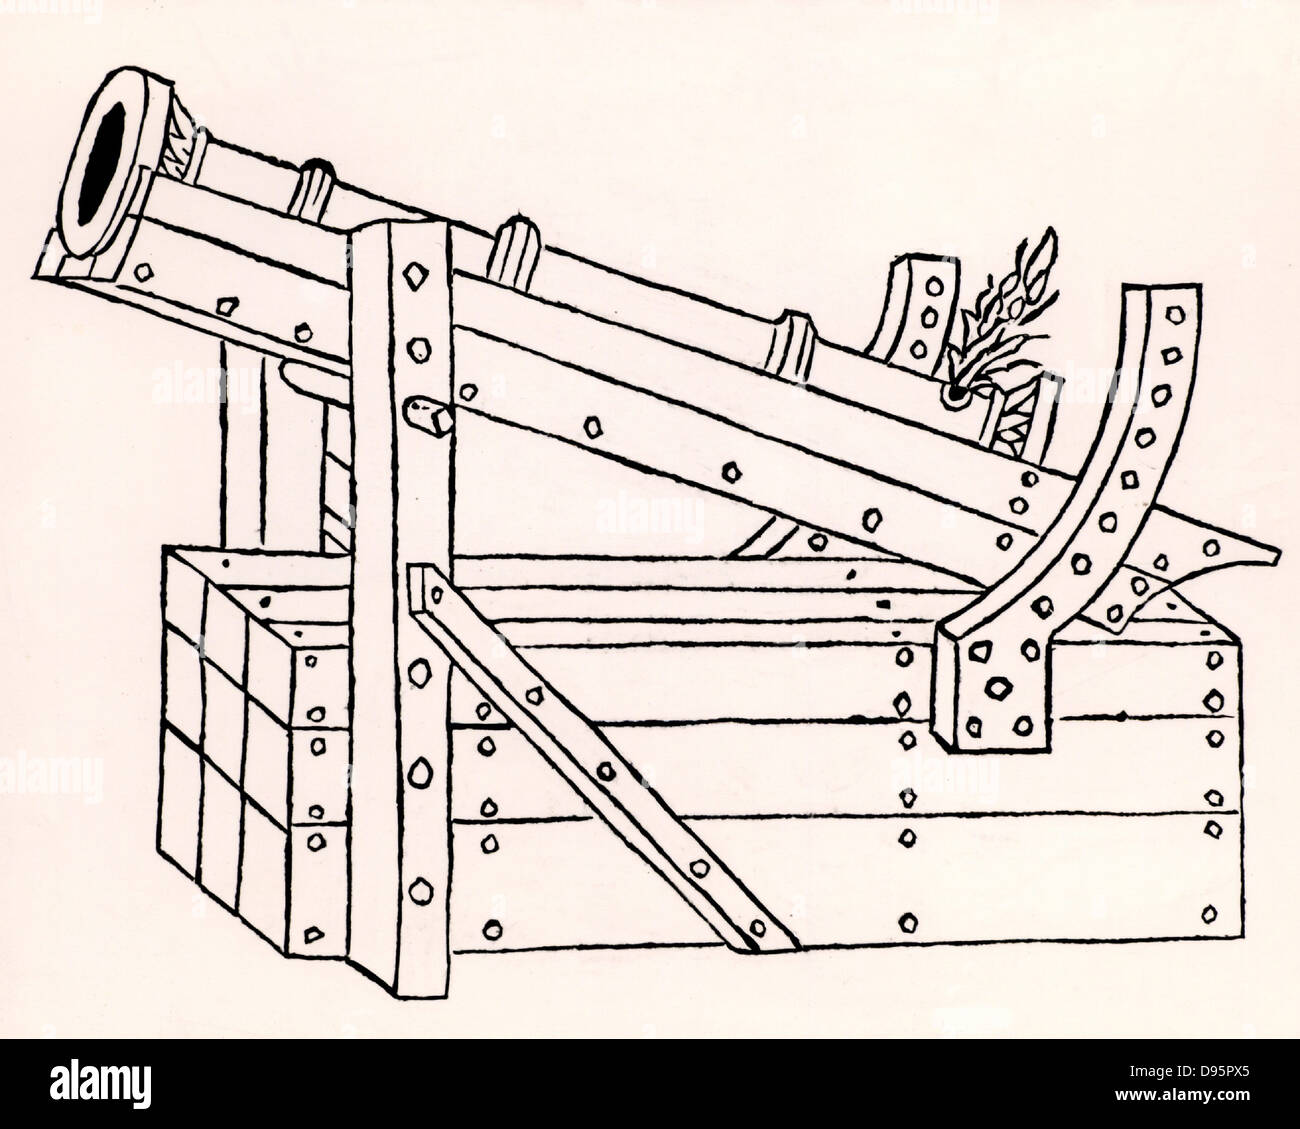 Cannon formed of iron staves hooped together and mounted on a primitive gun carriage. The elevation of the gun could be moving the rod on the front pillar into a different slot.    From 'De re militari' by Roberto Valturio (Verona, 1472).  Woodcut. Stock Photo